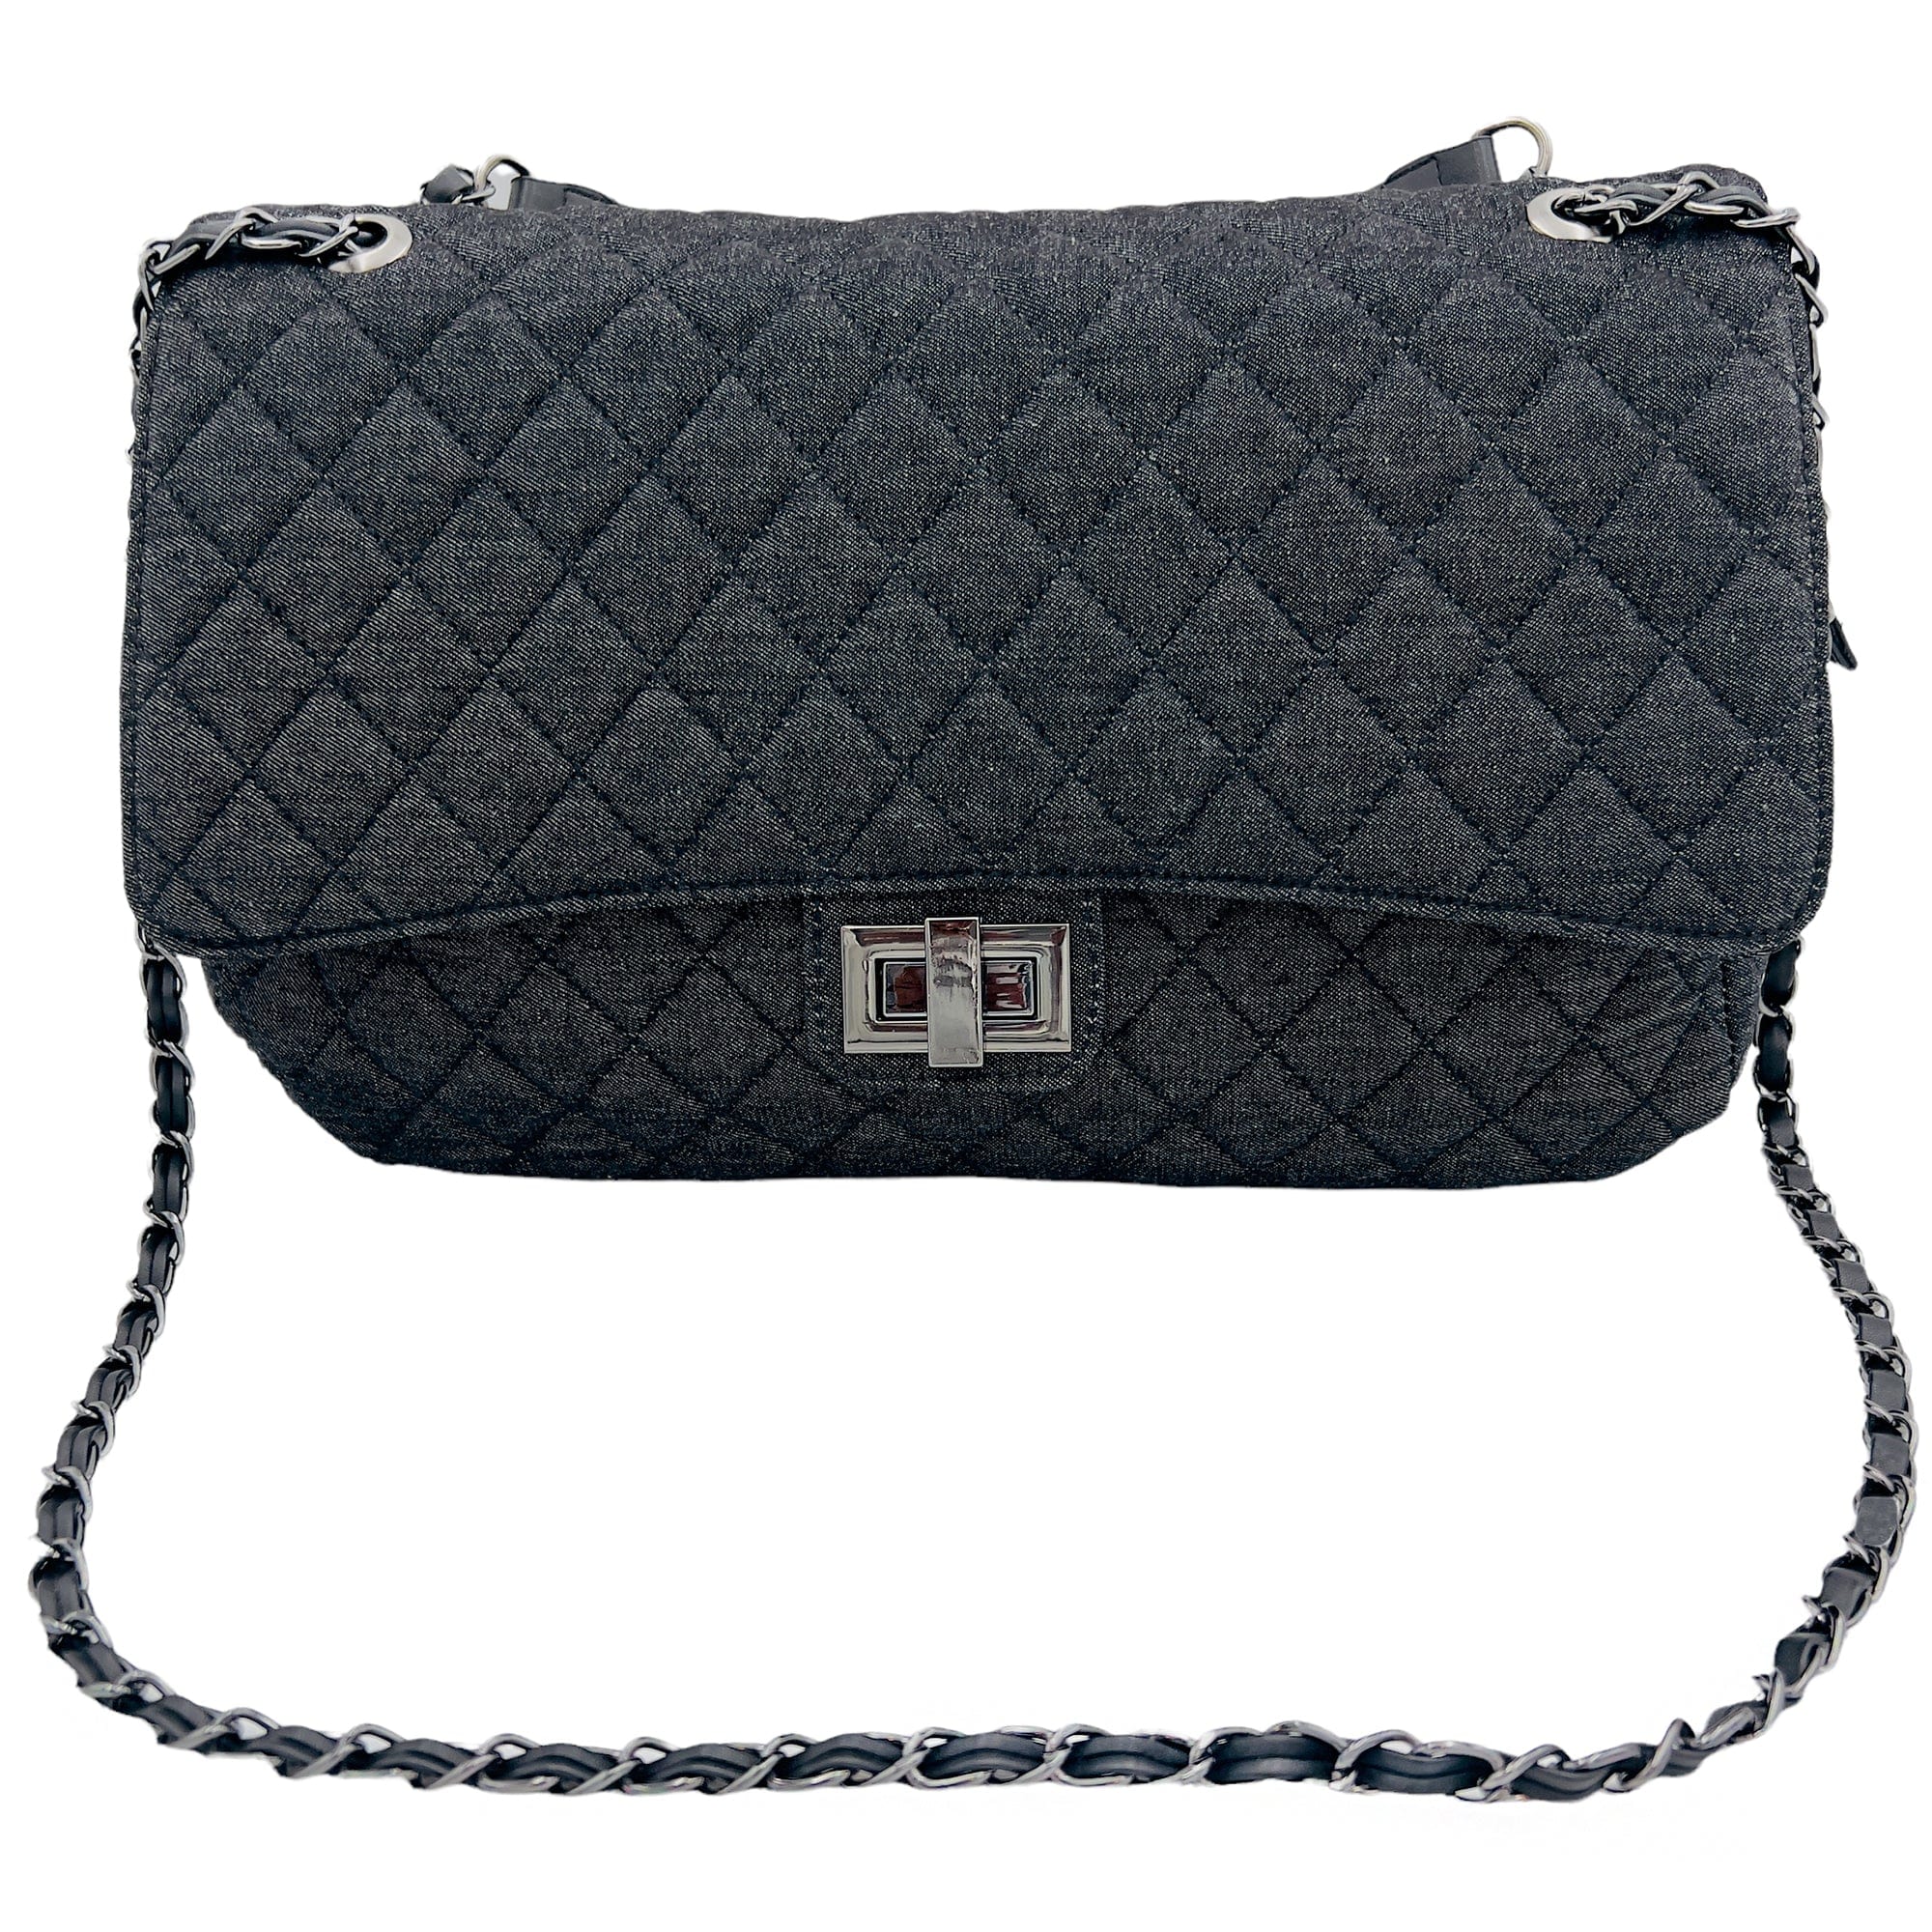 Chanel Tweed Small Easy Reissue Messenger Bag